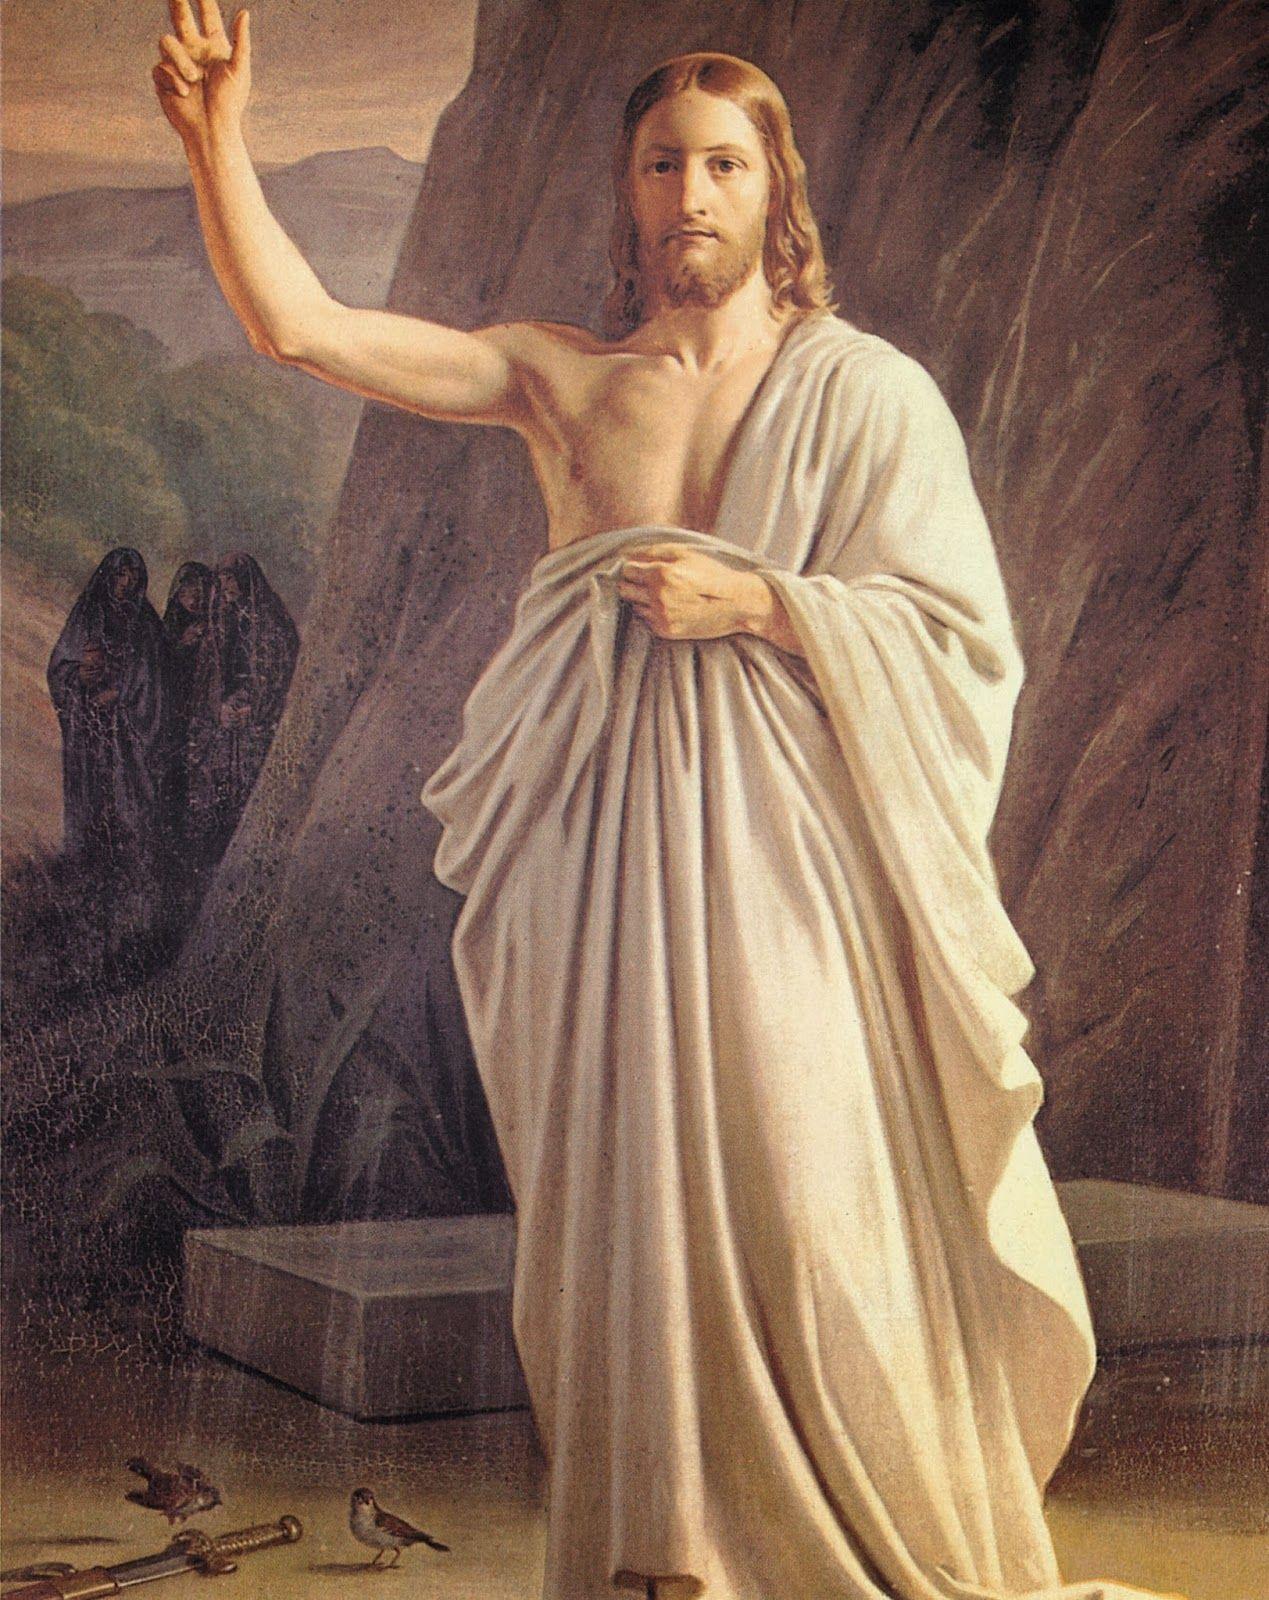 The resurrection of Jesus is the Christian belief that, after